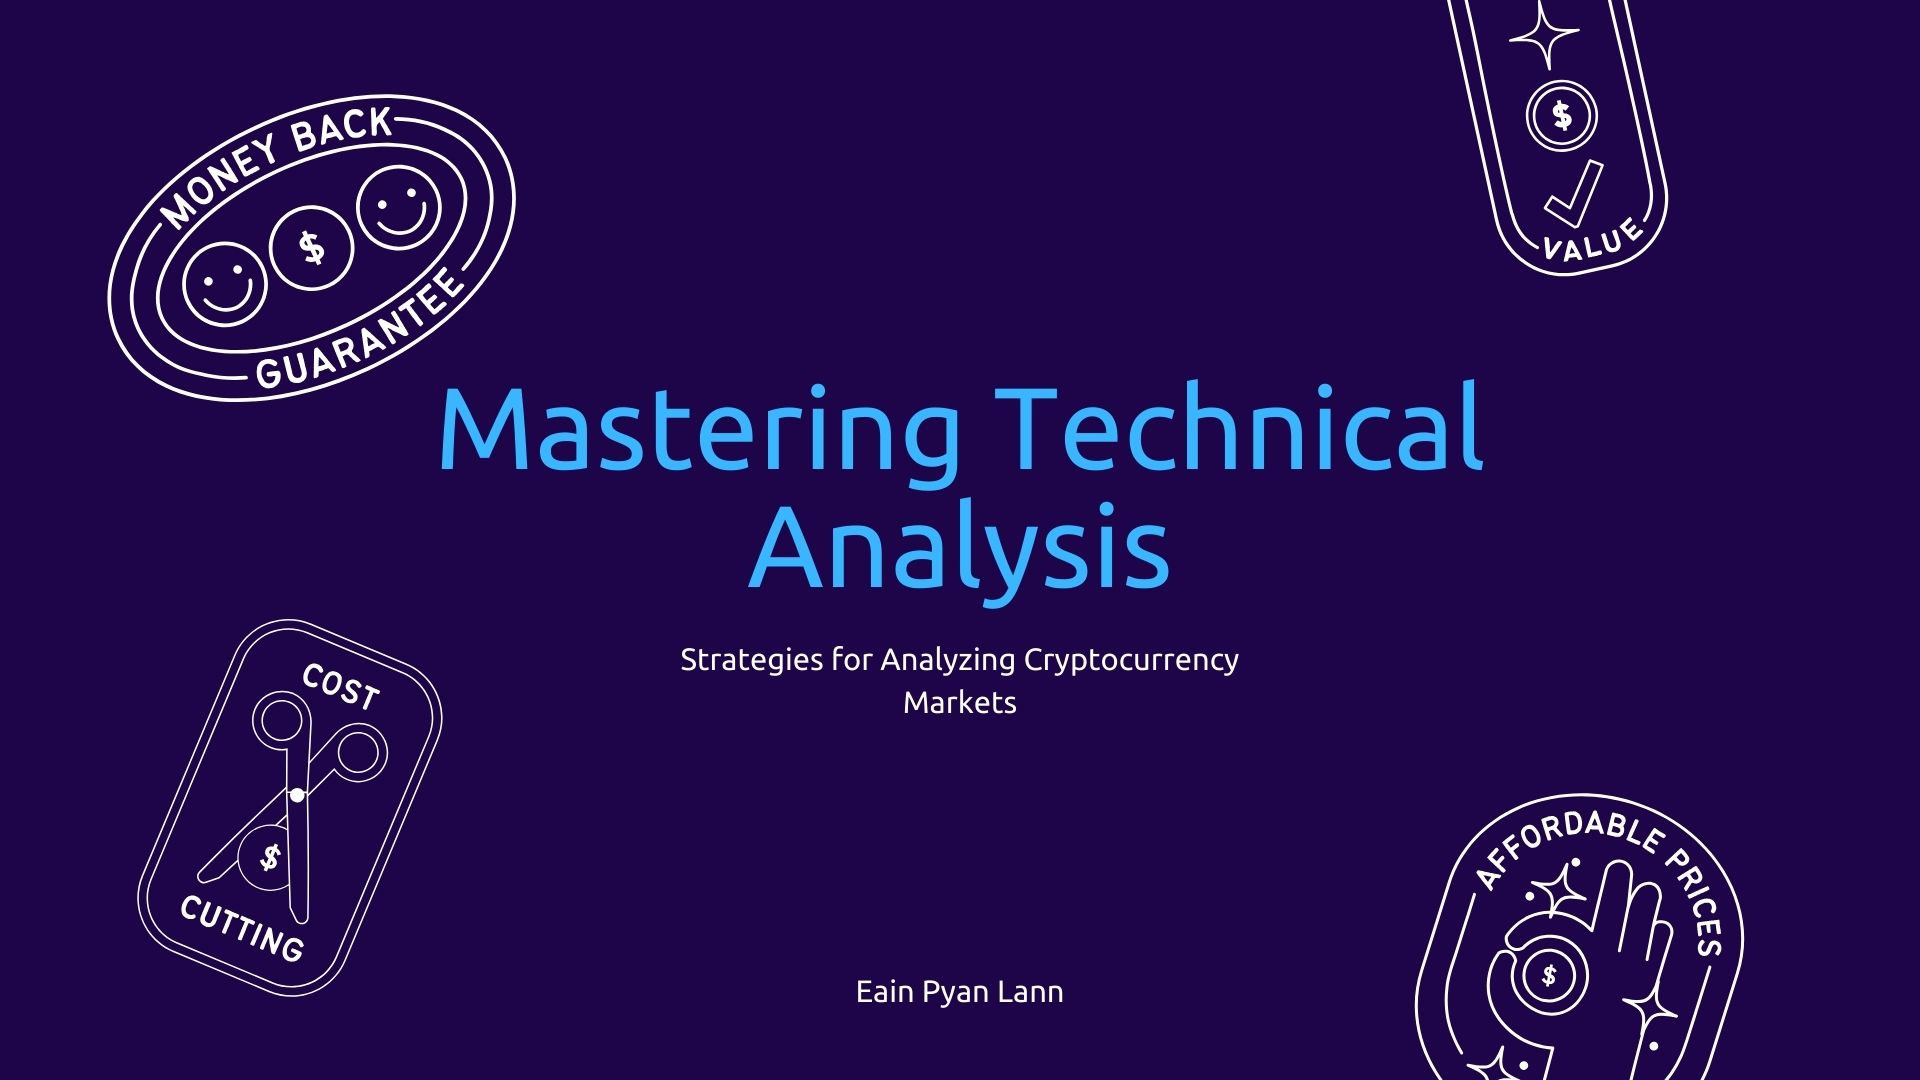 Mastering Technical Analysis: Strategies for Analyzing Cryptocurrency Markets